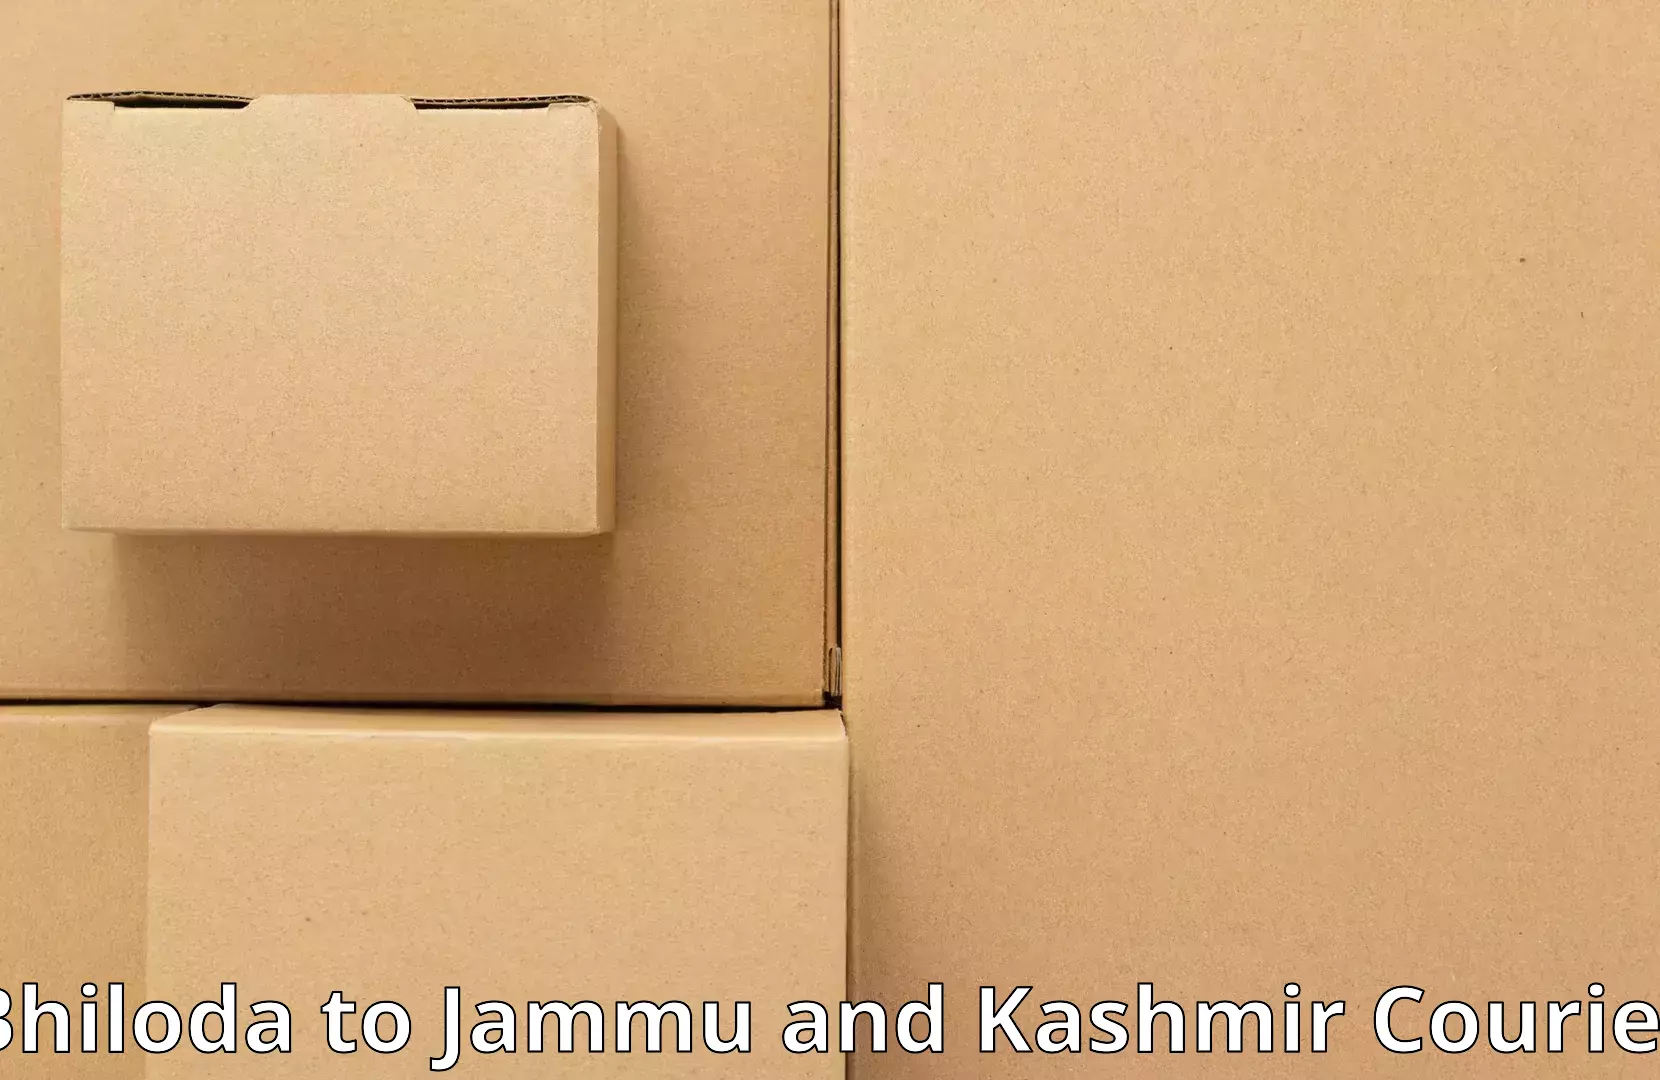 Trusted relocation experts Bhiloda to Shopian